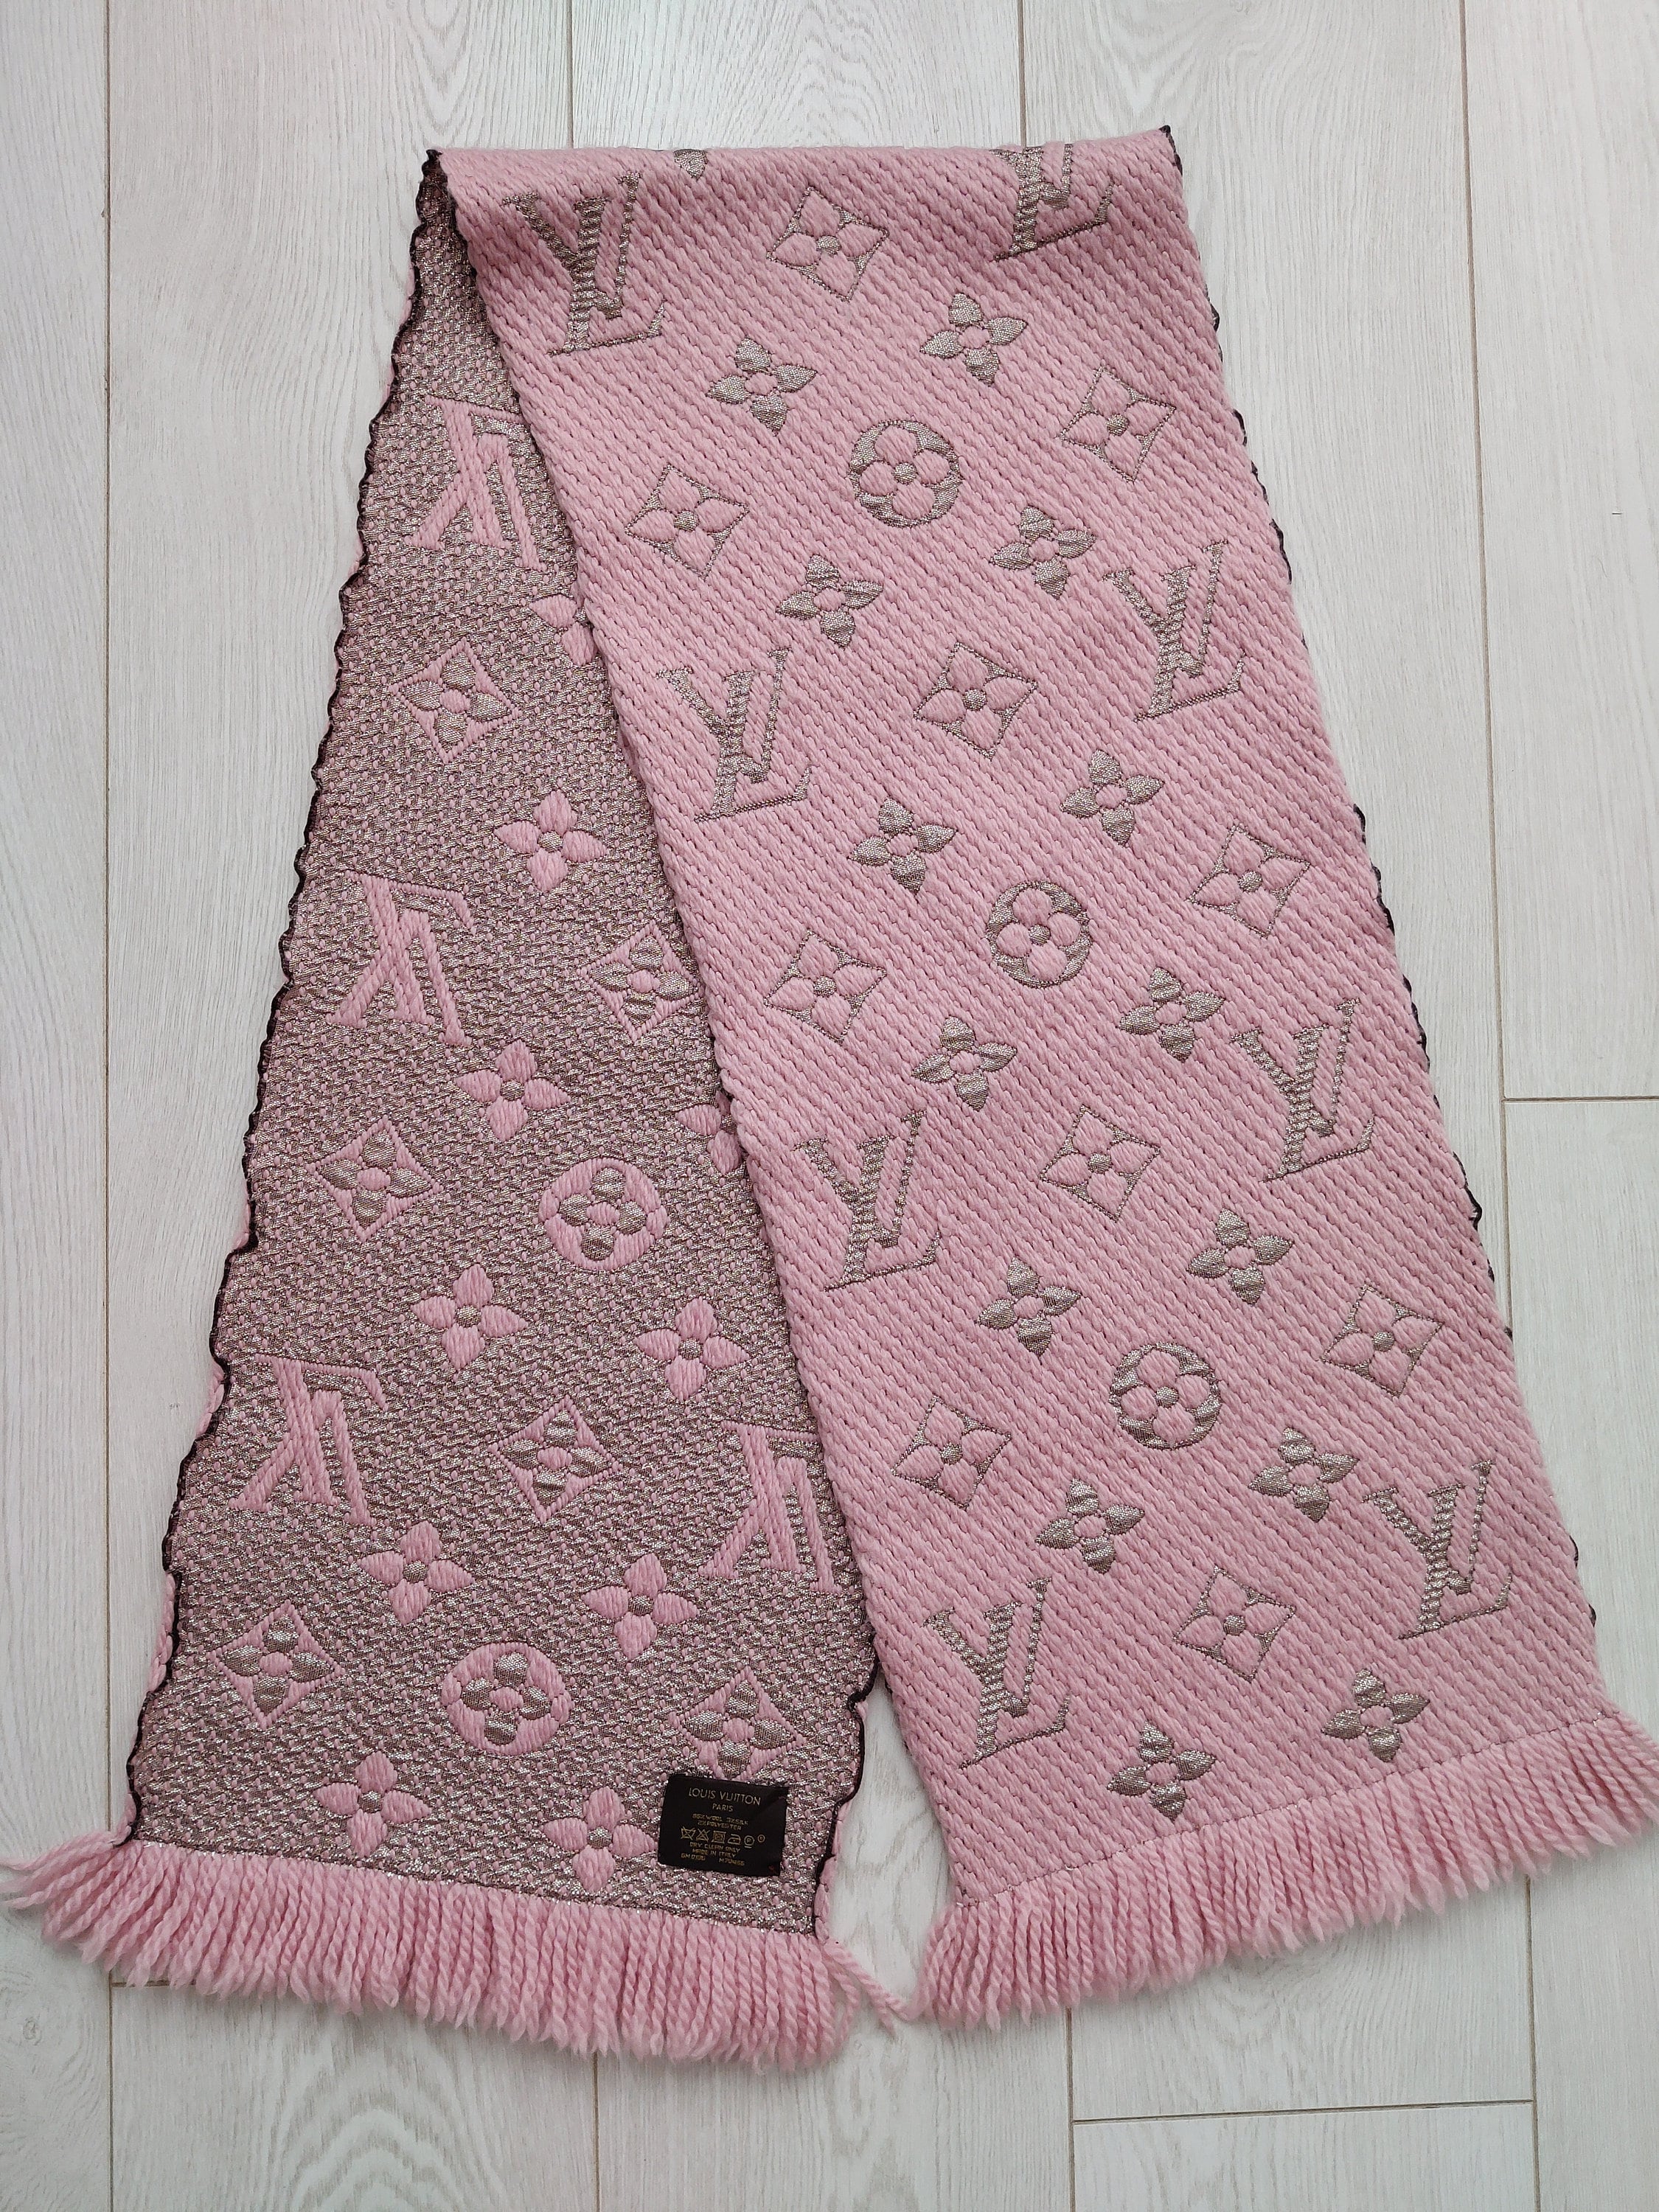 Louis Vuitton Silk LV Monogram Scarf - Pink Scarves and Shawls, Accessories  - LOU796108